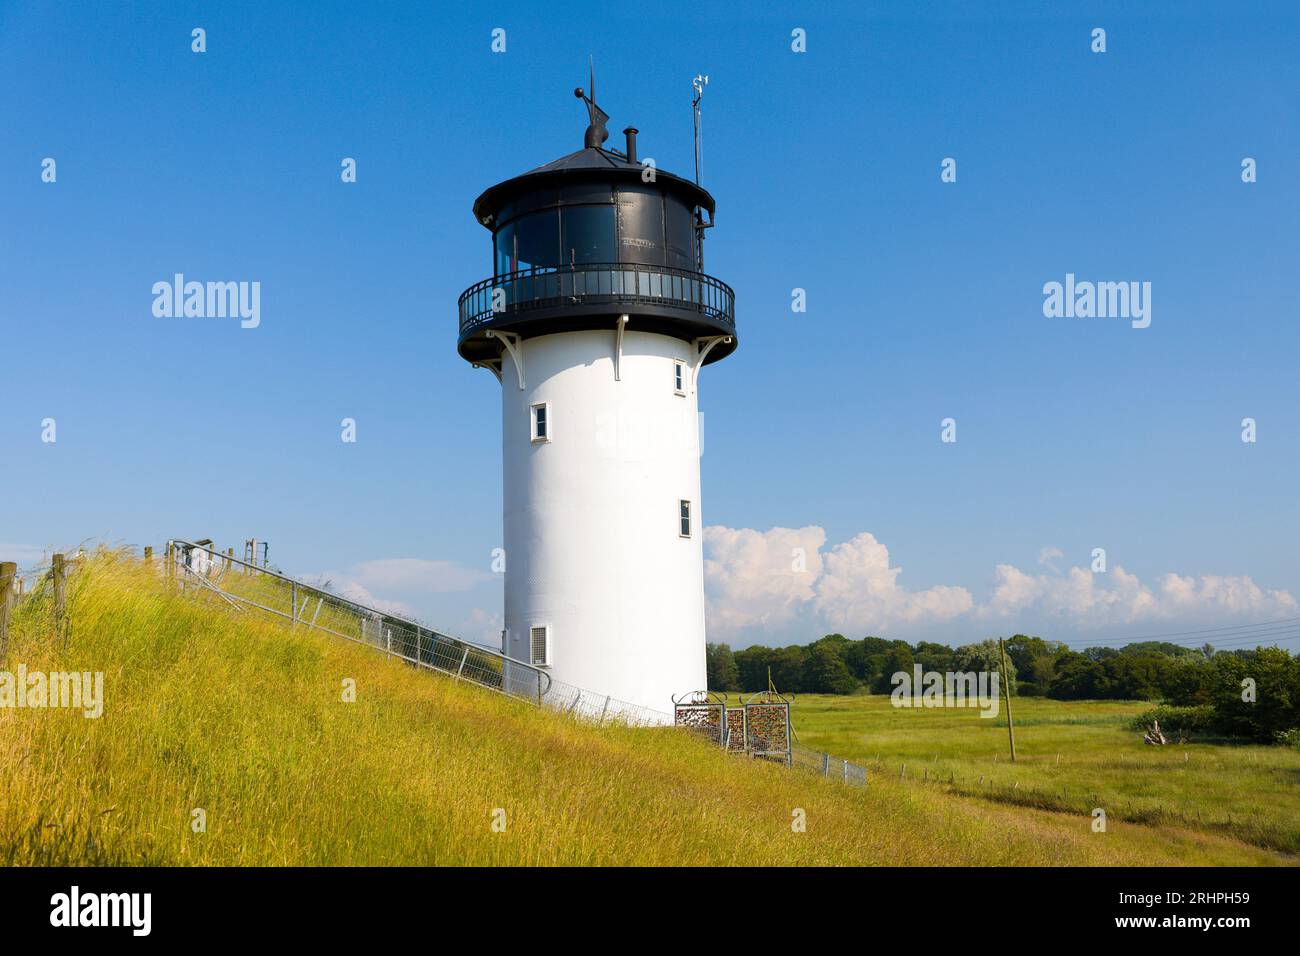 Lighthouse Dicke Berta, Altenbruch, Cuxhaven, Lower Saxony, Germany Stock Photo